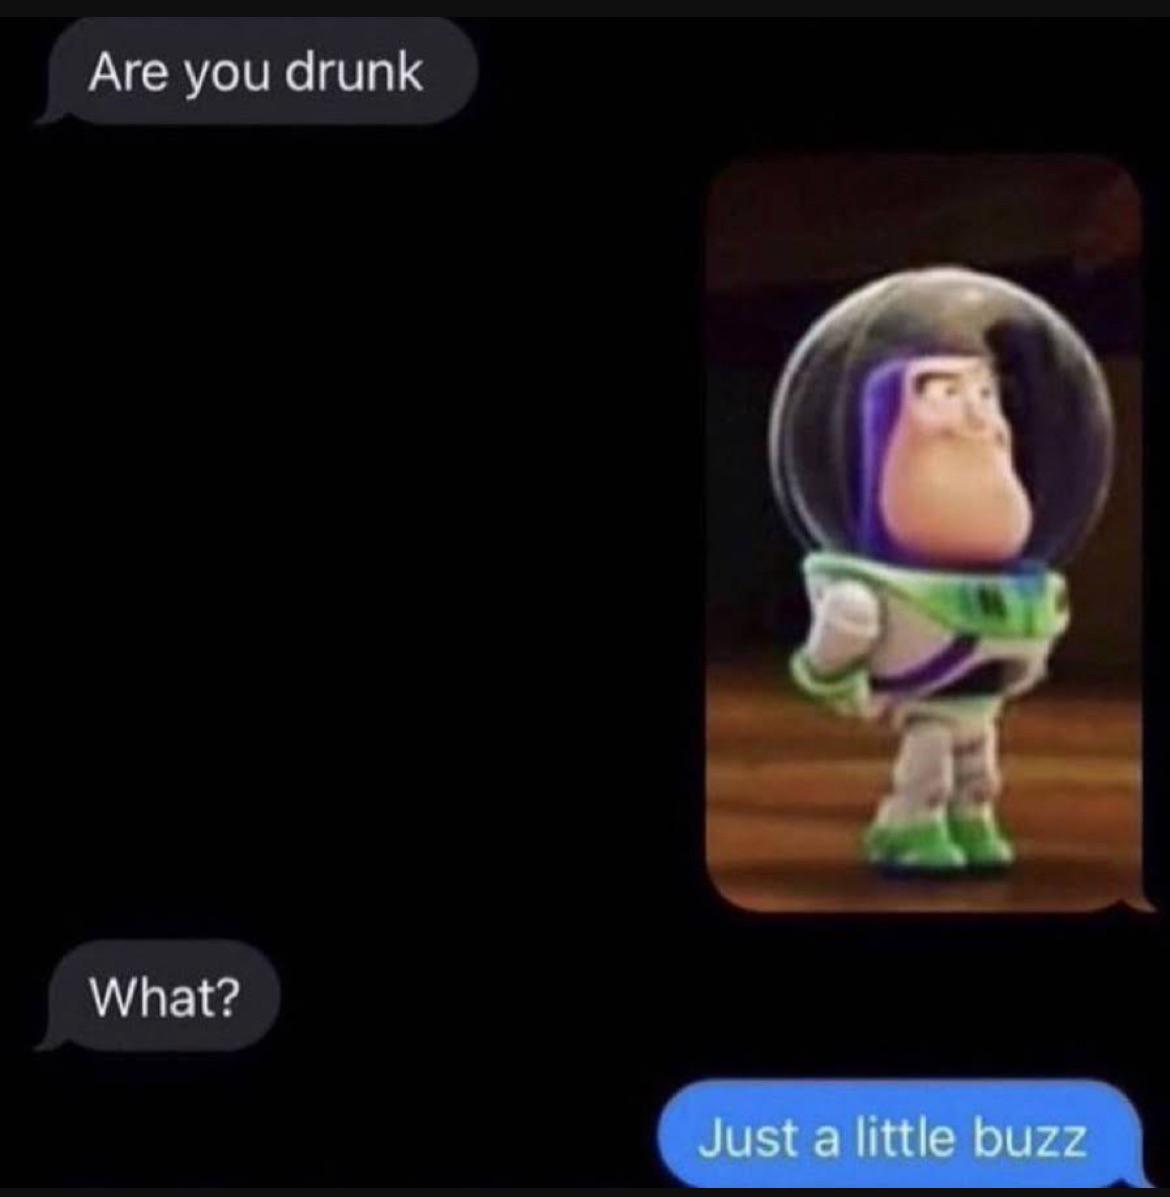 funny memes and pics - you drunk just a little buzz meme - Are you drunk What? Just a little buzz